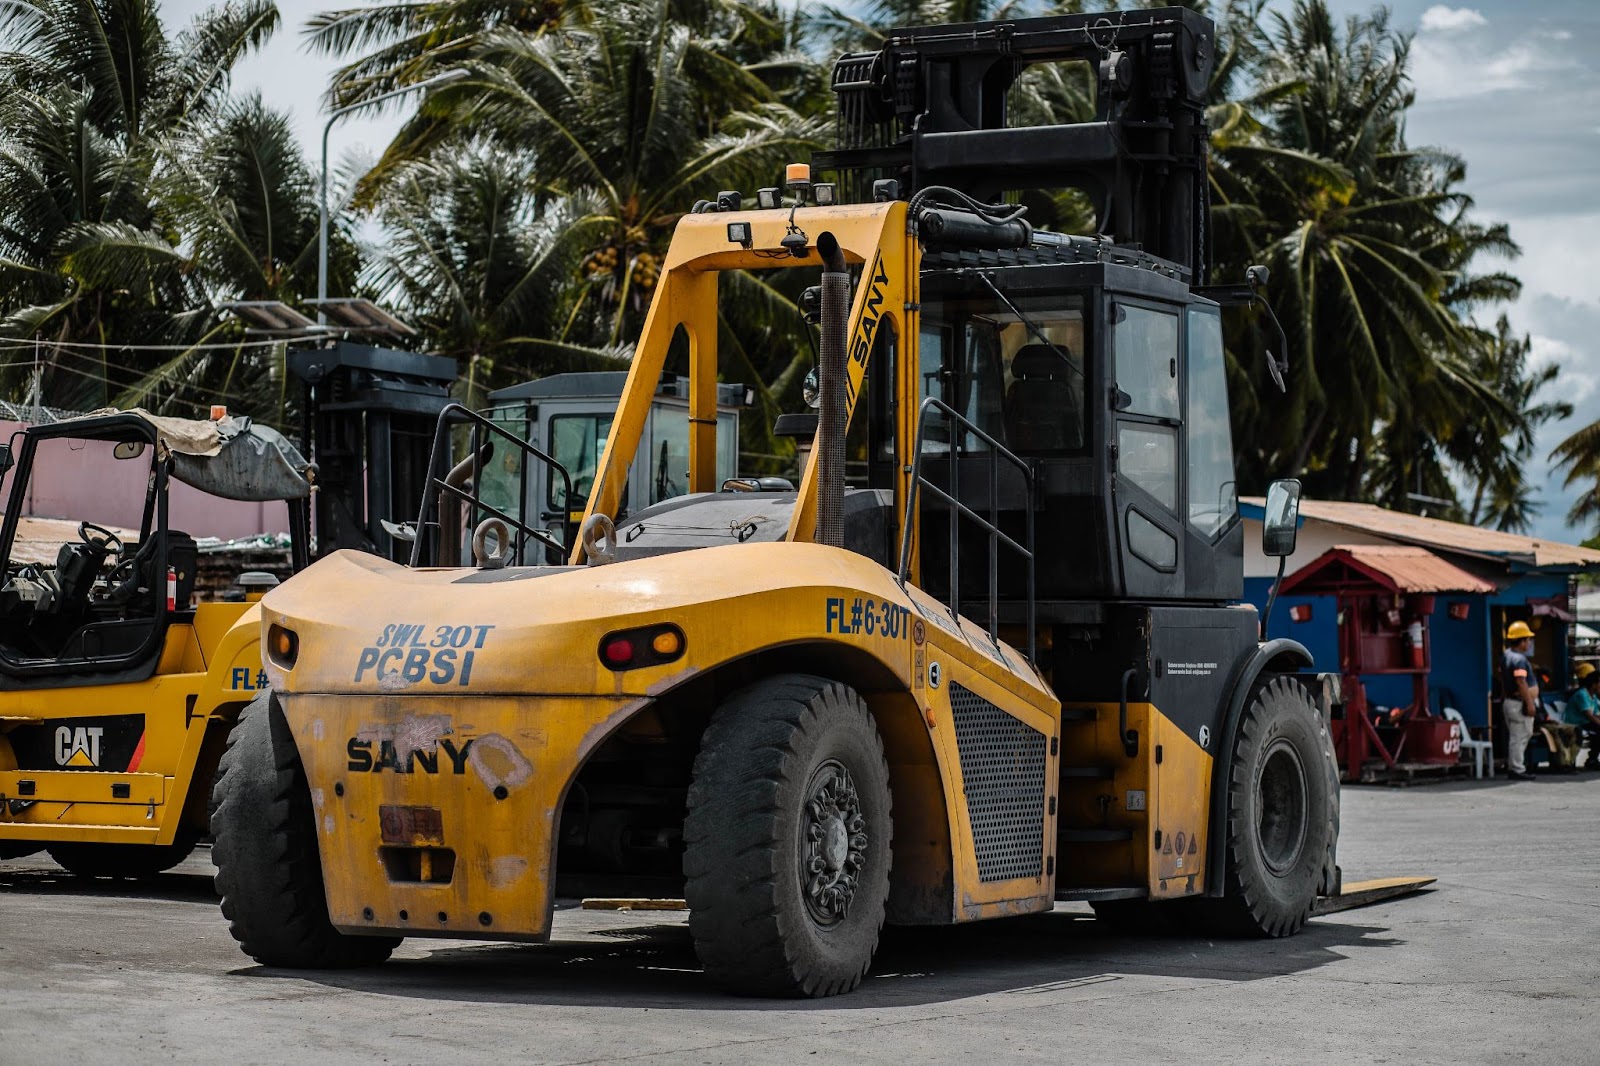 A class-VII rugged, large-scale yellow forklift